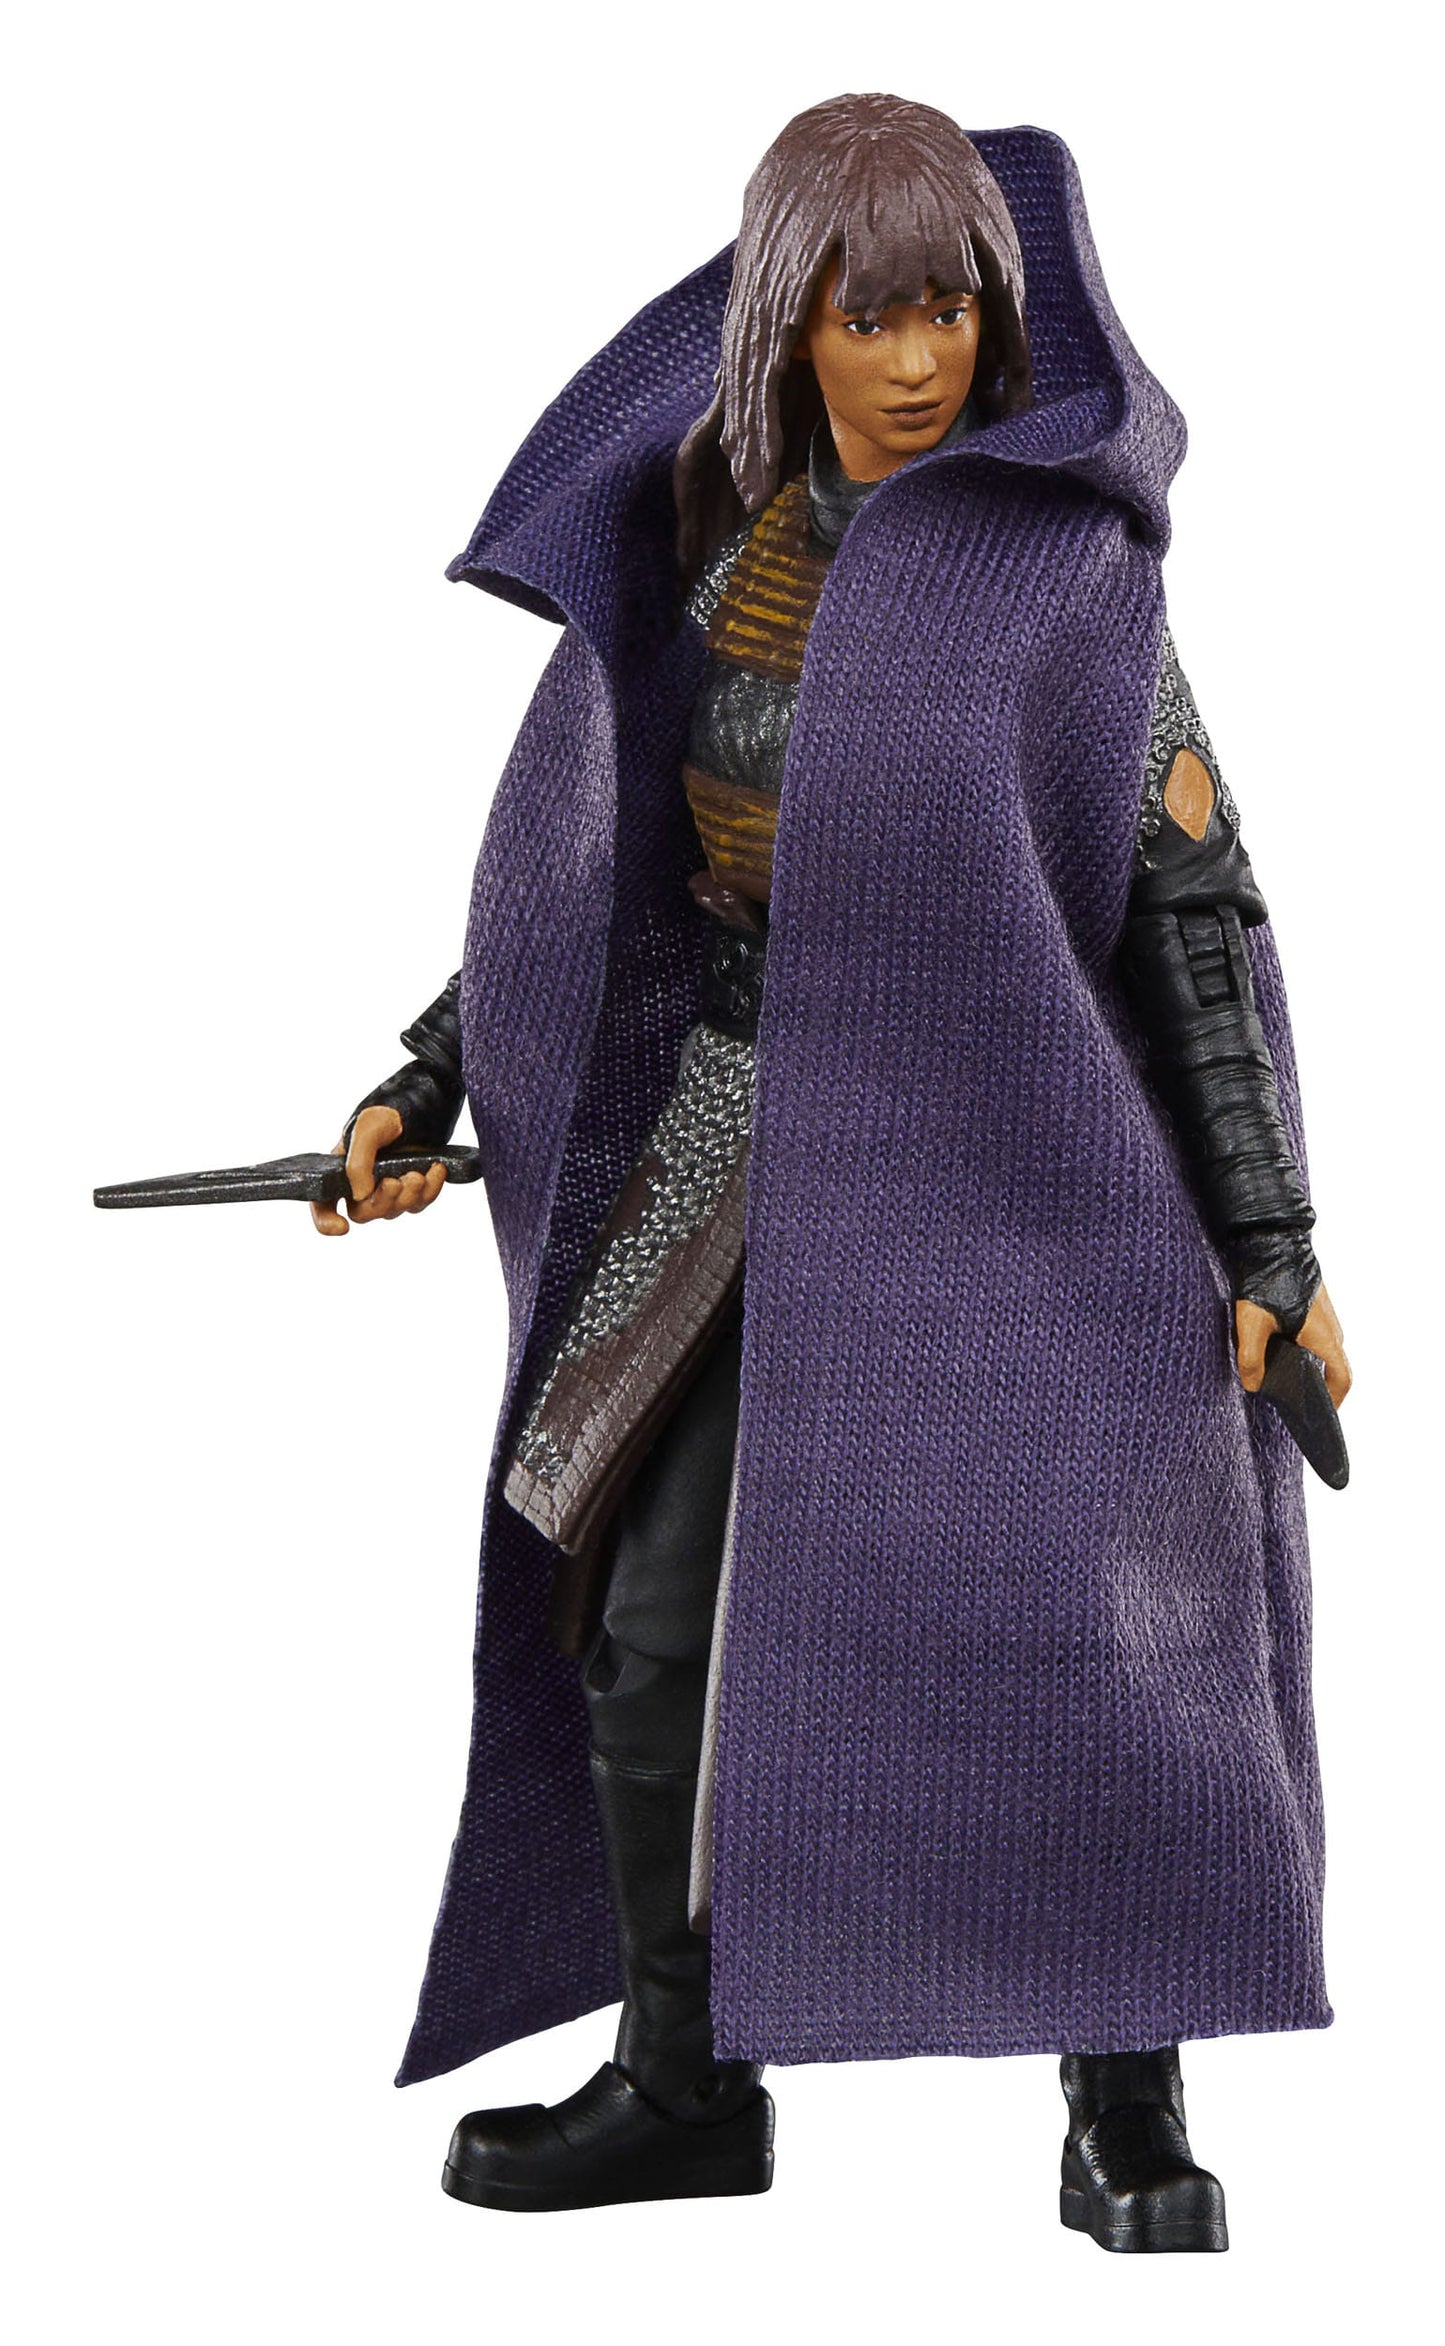 Pre-Order! Star Wars Vintage Collection The Acolyte Actionfigur Mae (Assassin) 10cm